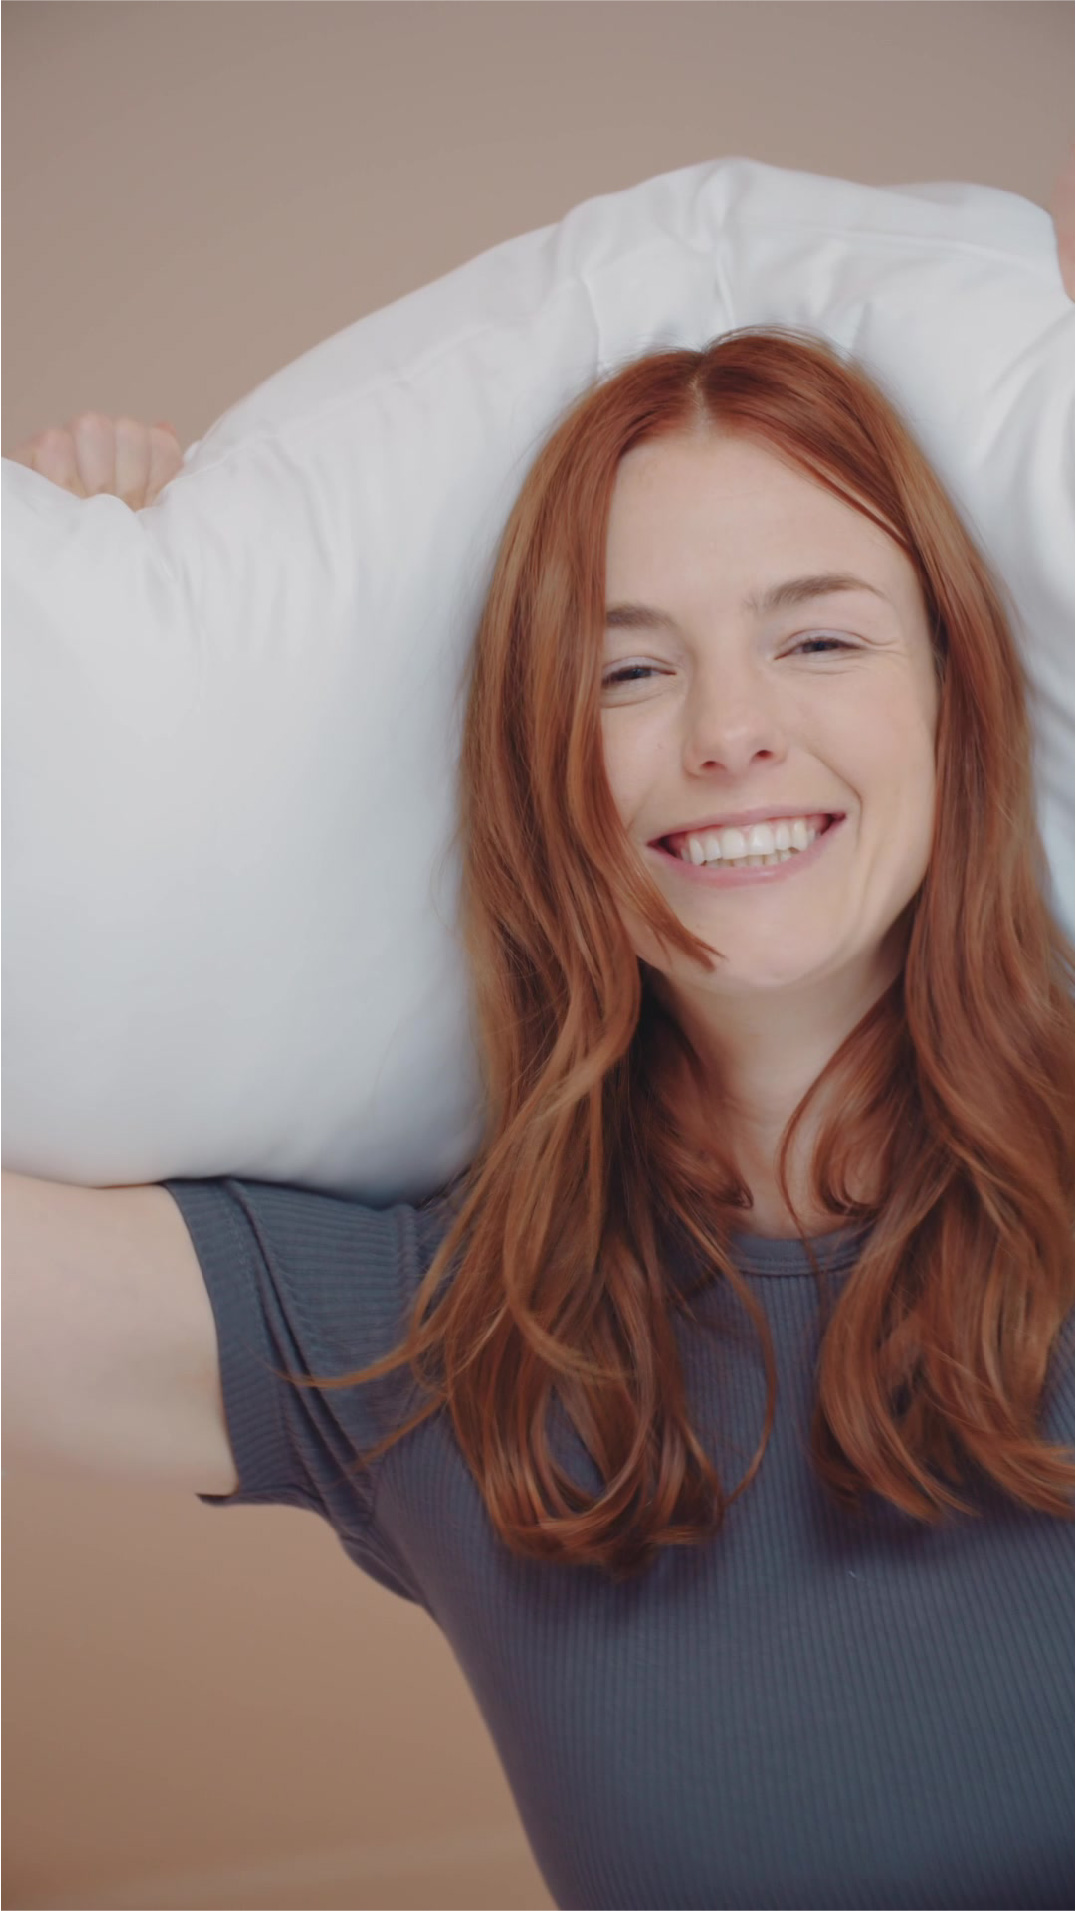 Holding pillow and smile